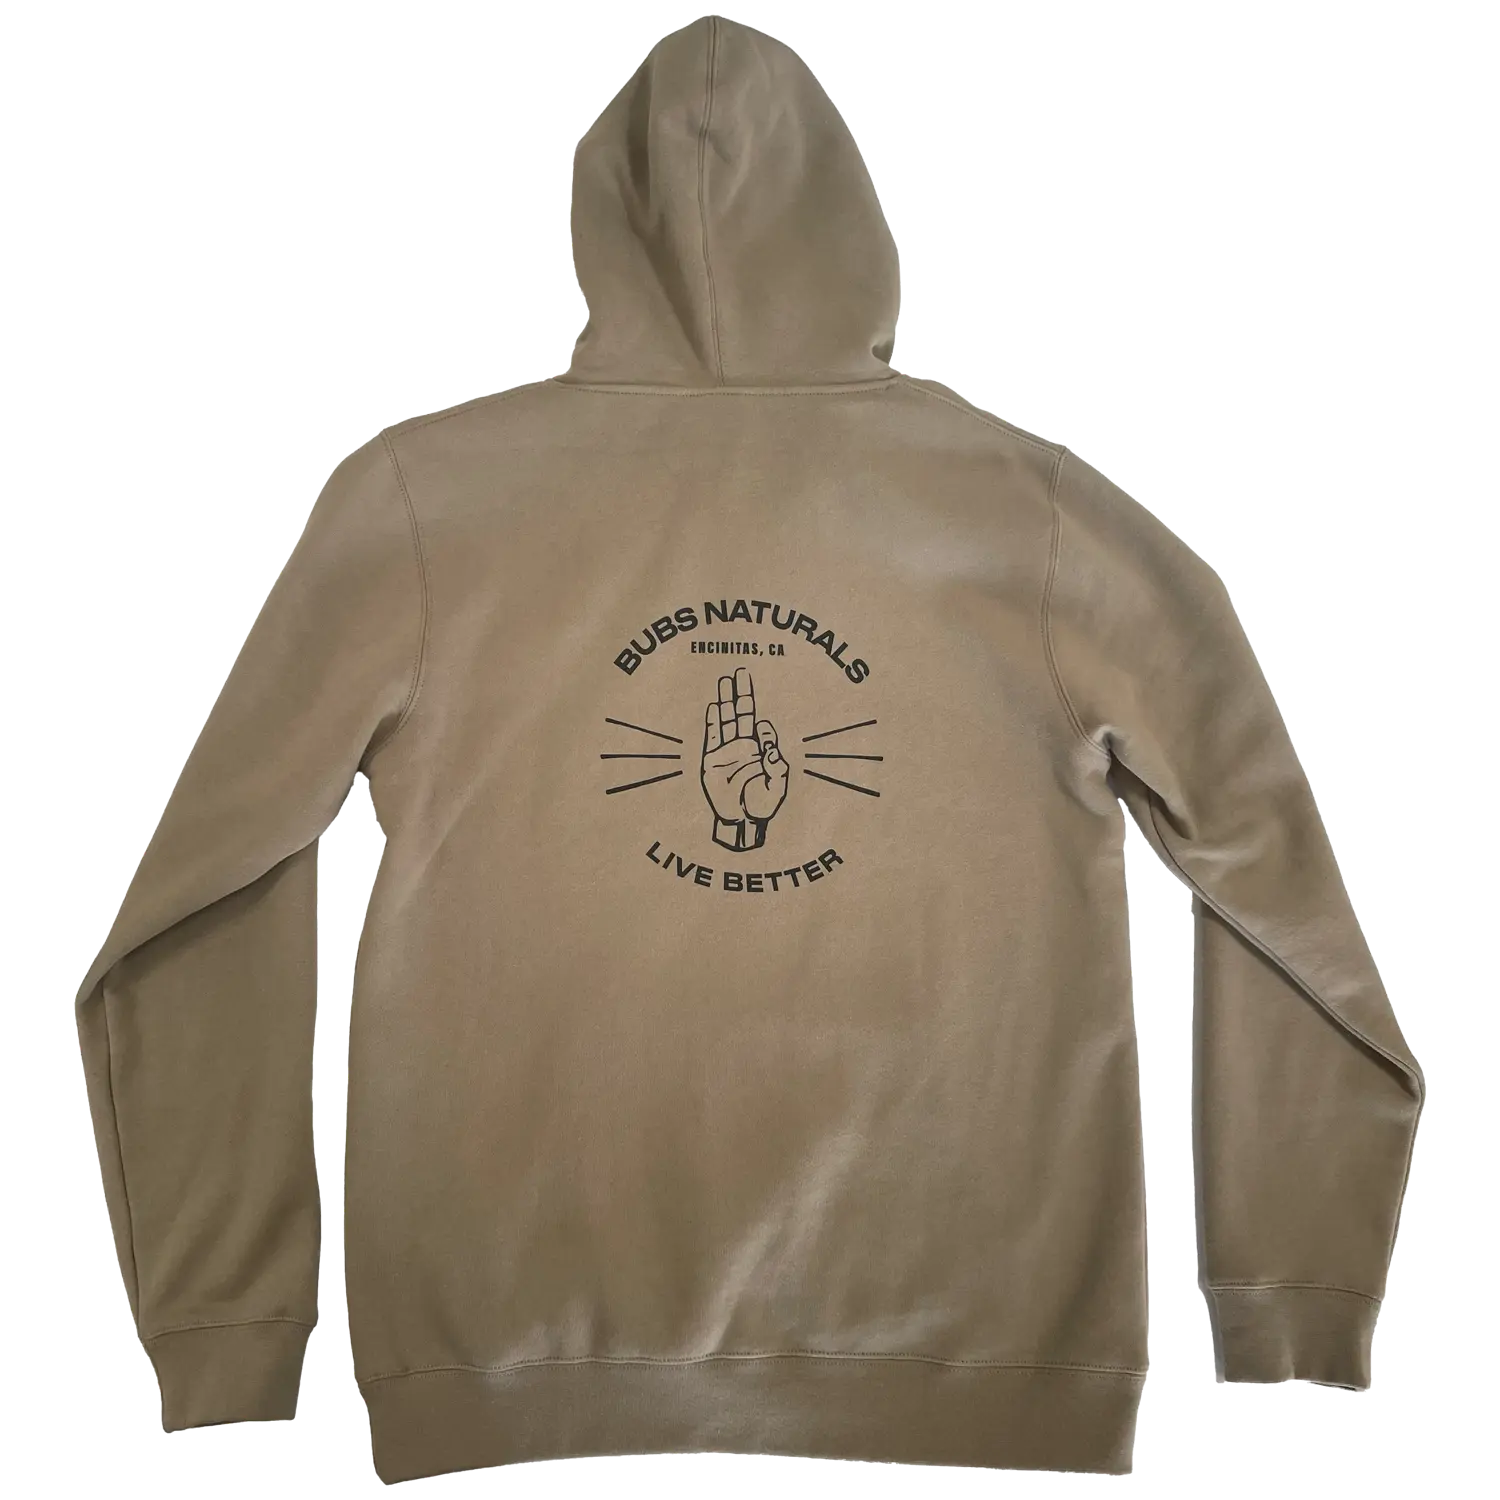 BUBS Naturals Tan A-Okay Pullover Hoodie Back